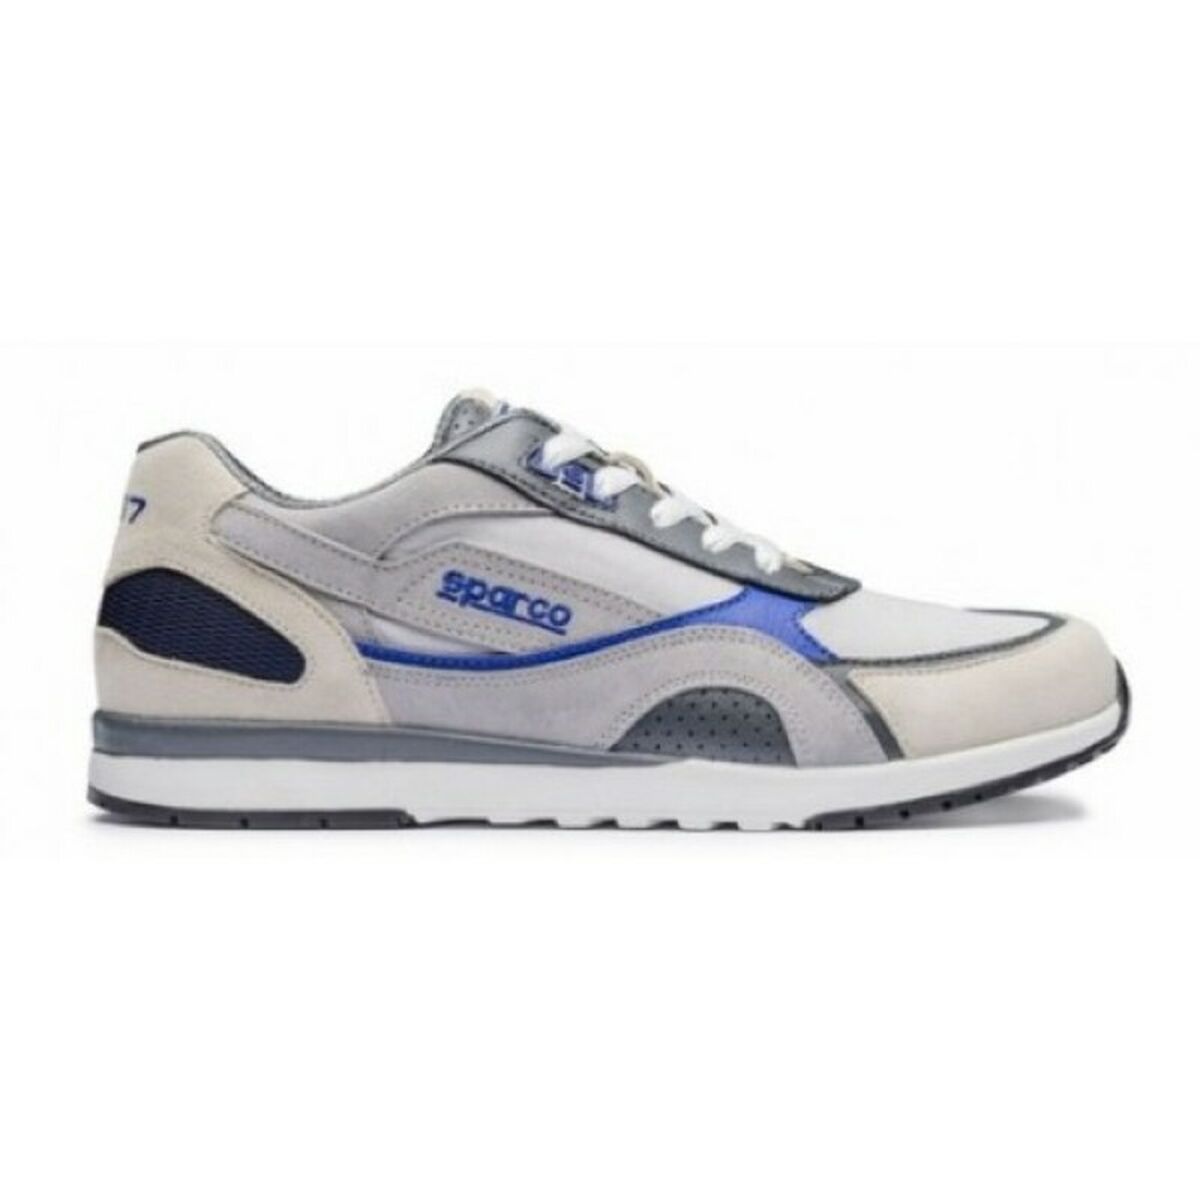 Men’s Casual Trainers Sparco SL-17 Blue